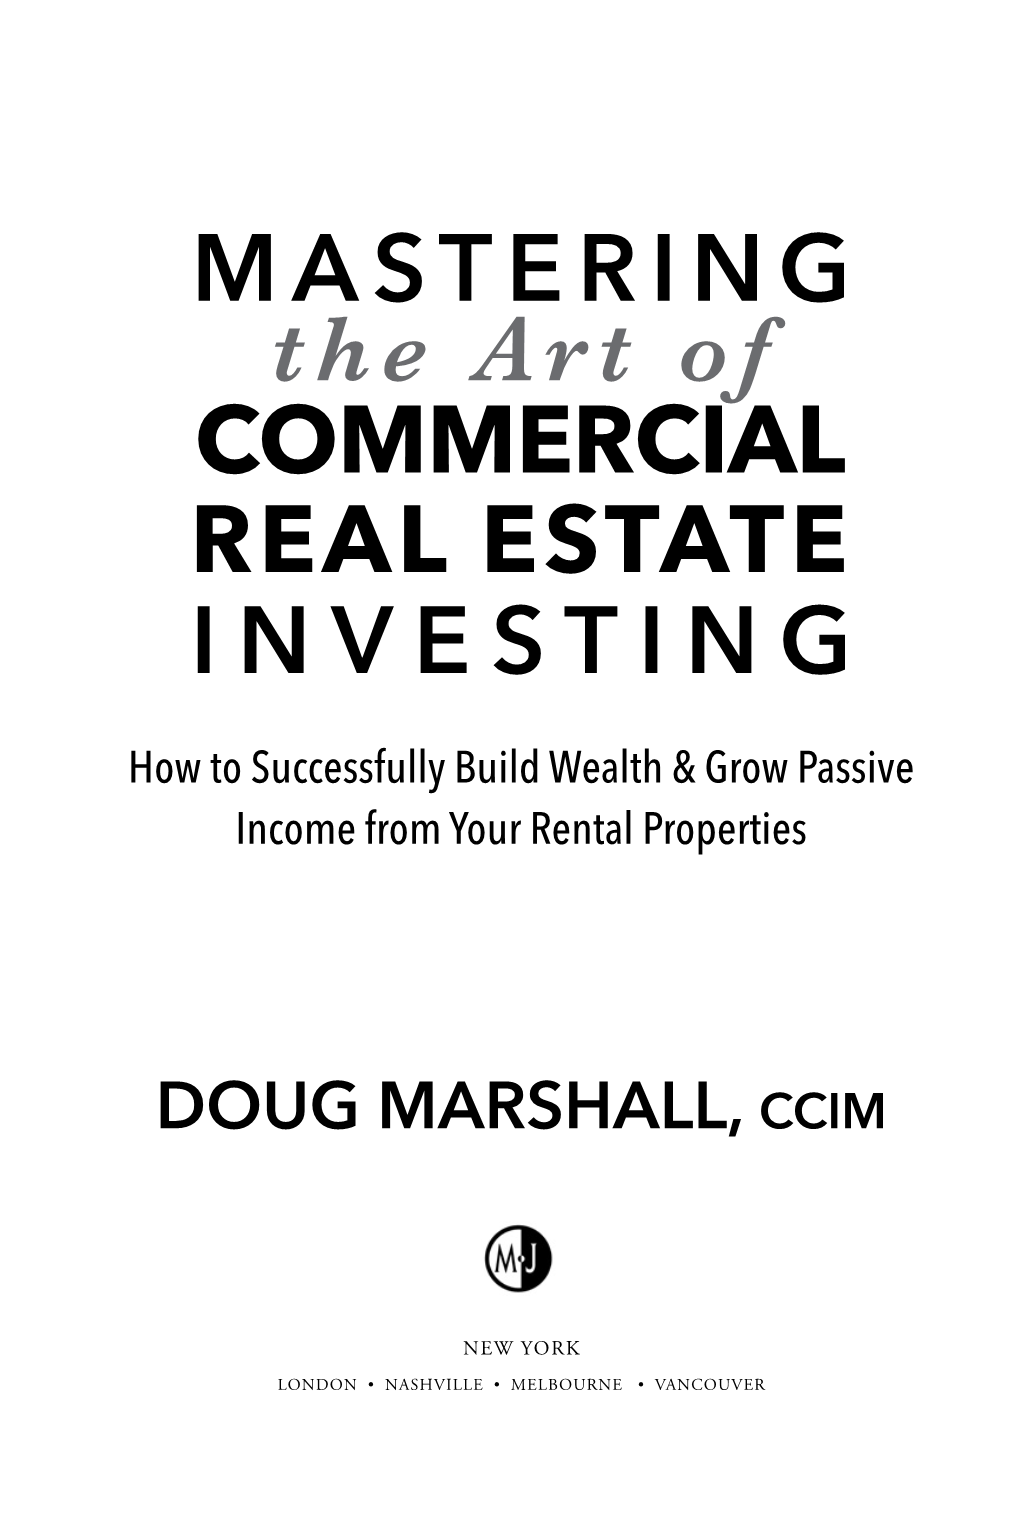 COMMERCIAL MASTERING REAL ESTATE INVESTING the Art Of